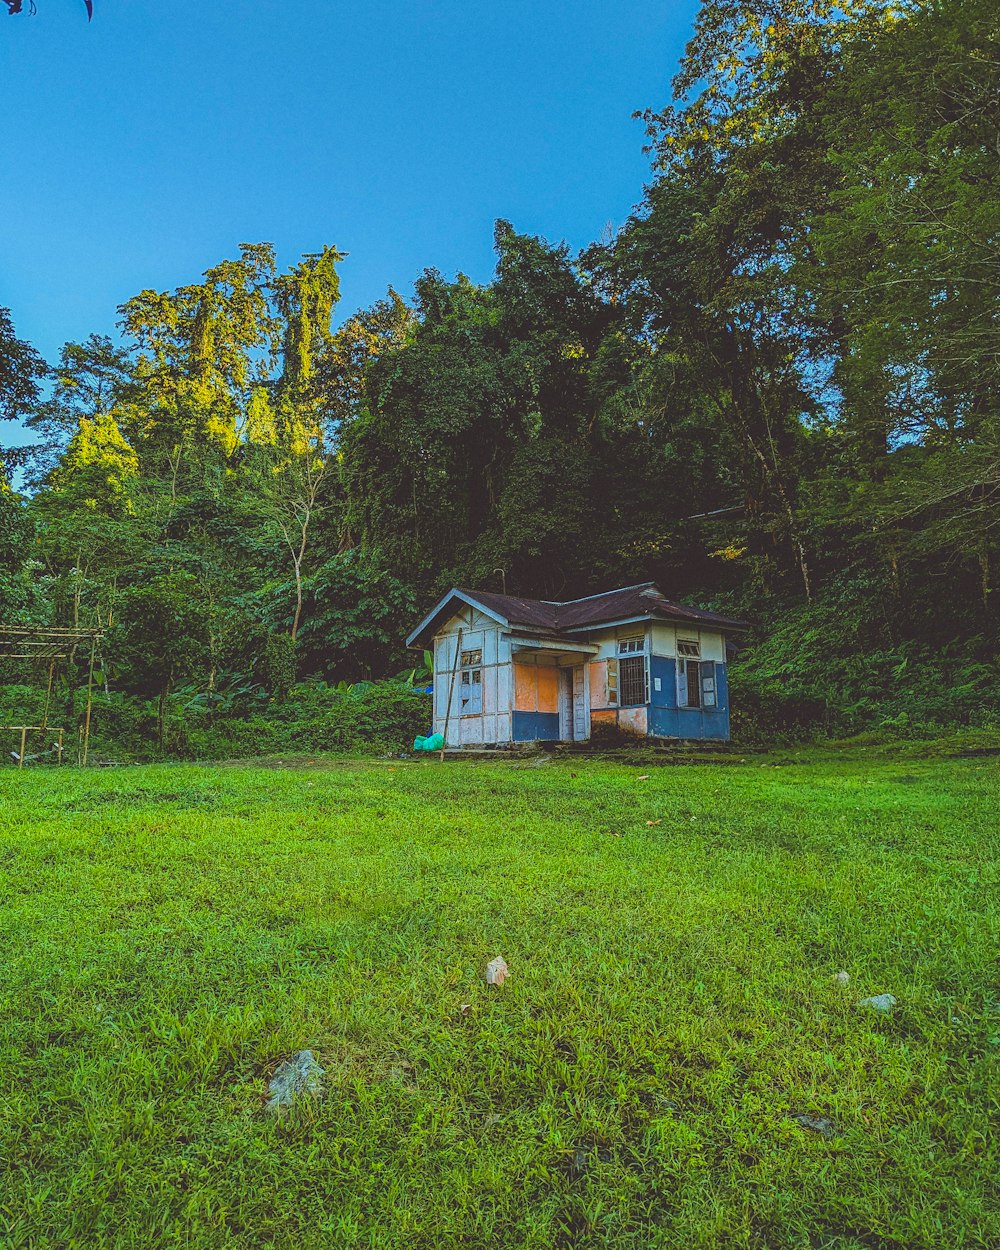 a small house sitting in the middle of a lush green field